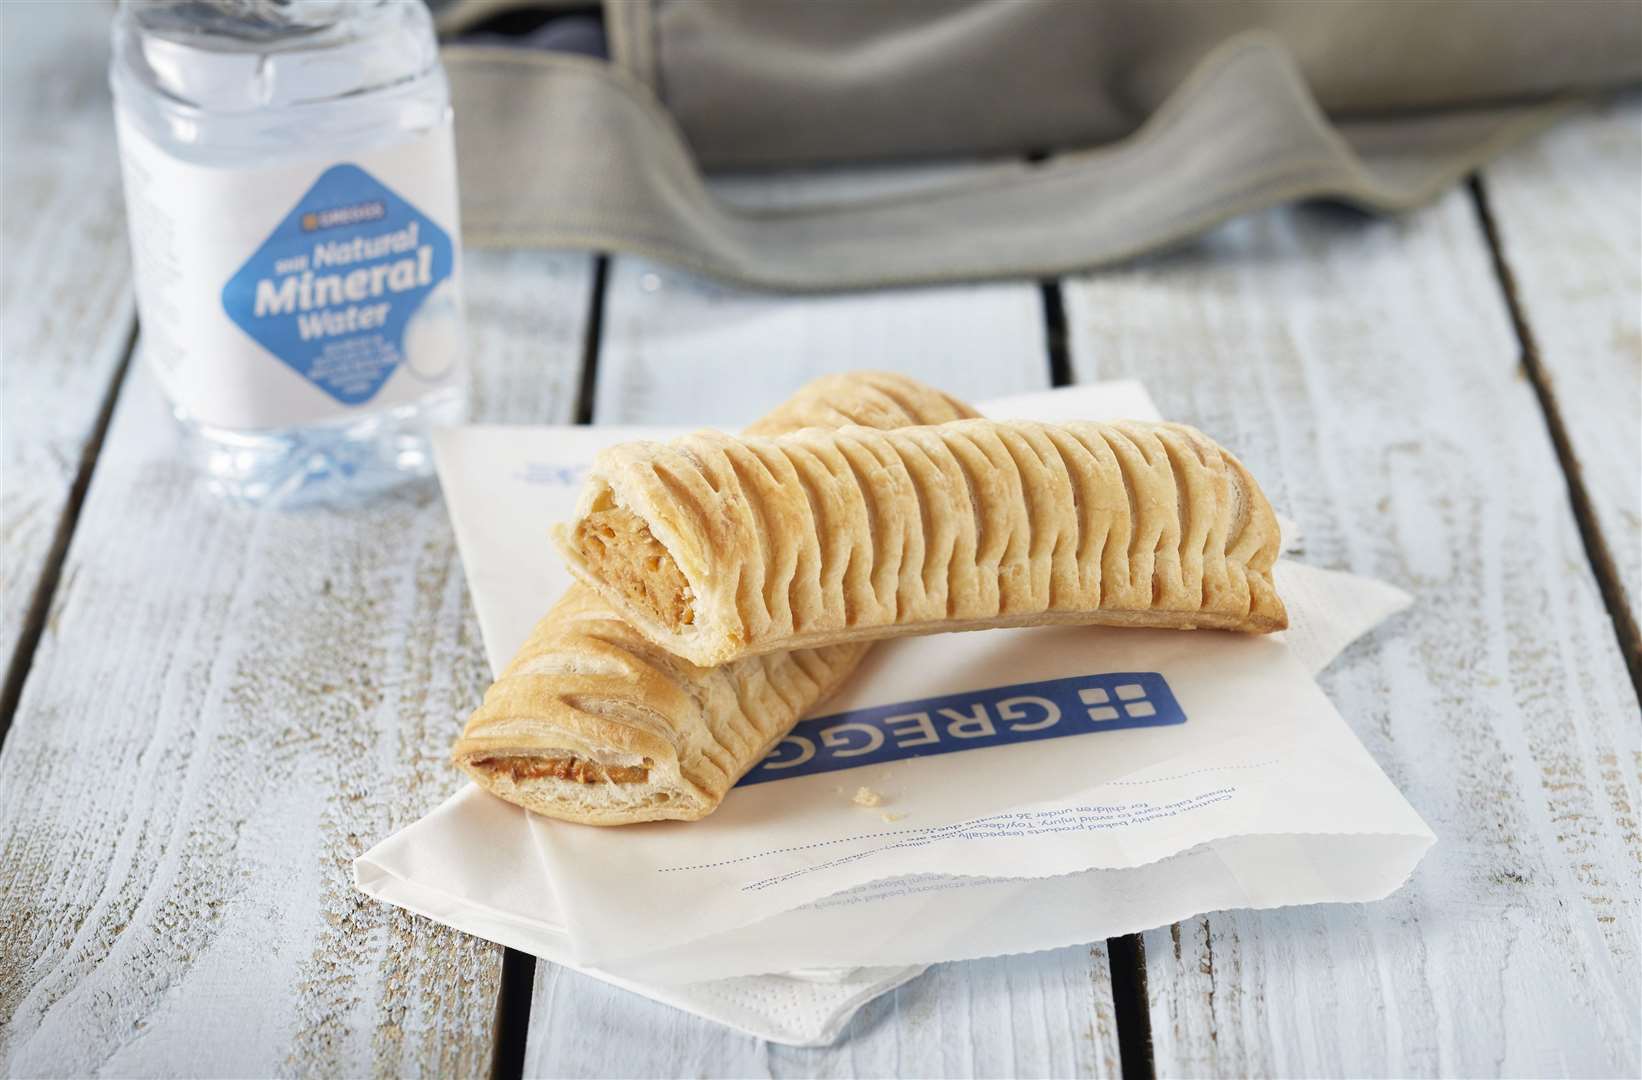 The new vegan sausage roll isn't available in most Kent stores